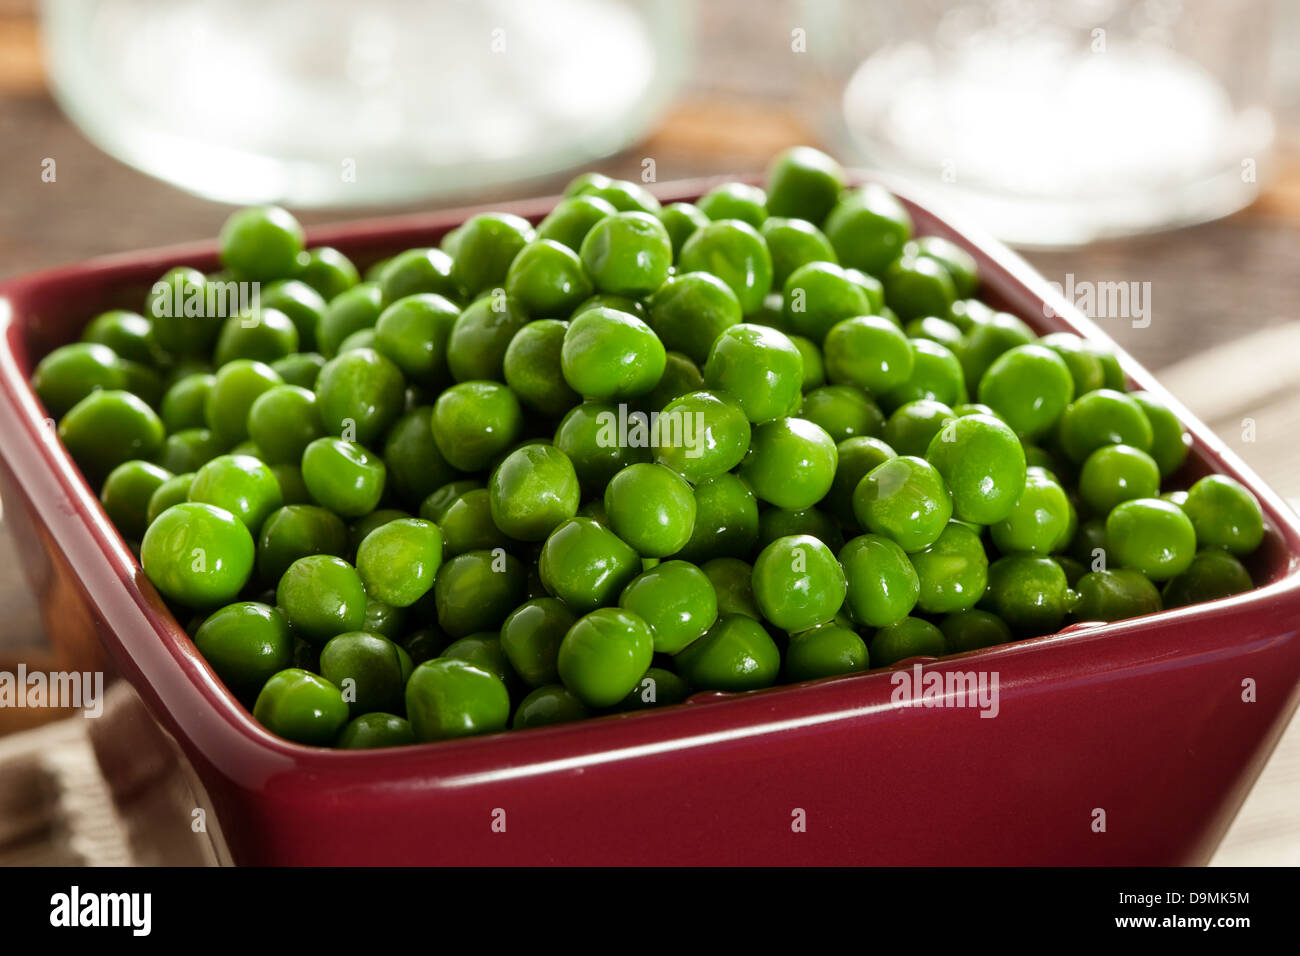 Fresh Green Organic Cooked peas against a background Stock Photo